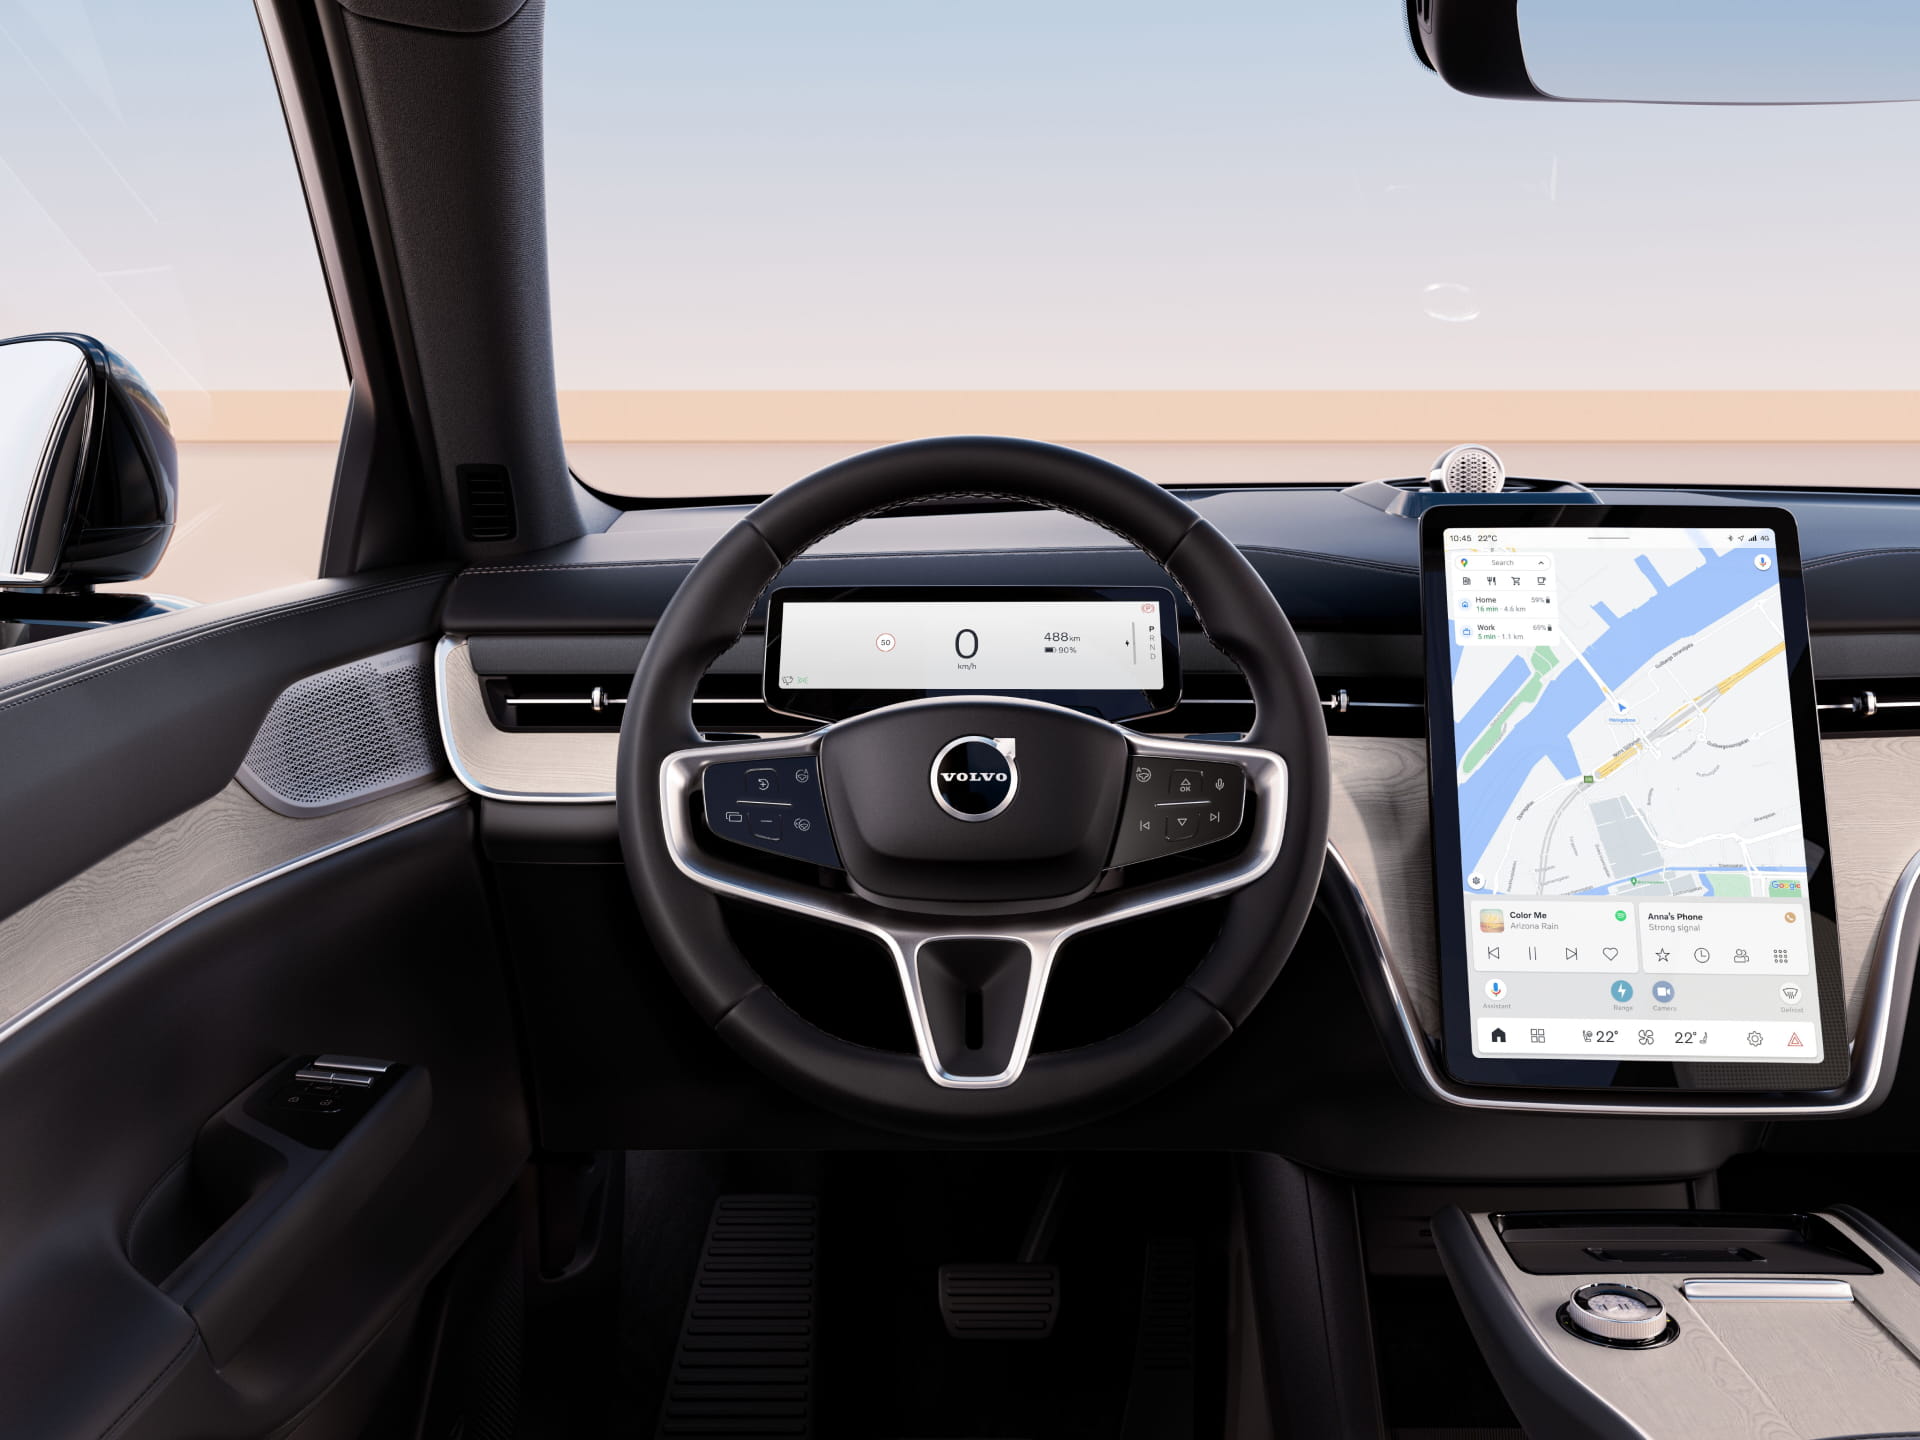 An image showing the steering wheel and sentre display from inside a Volvo EX90.